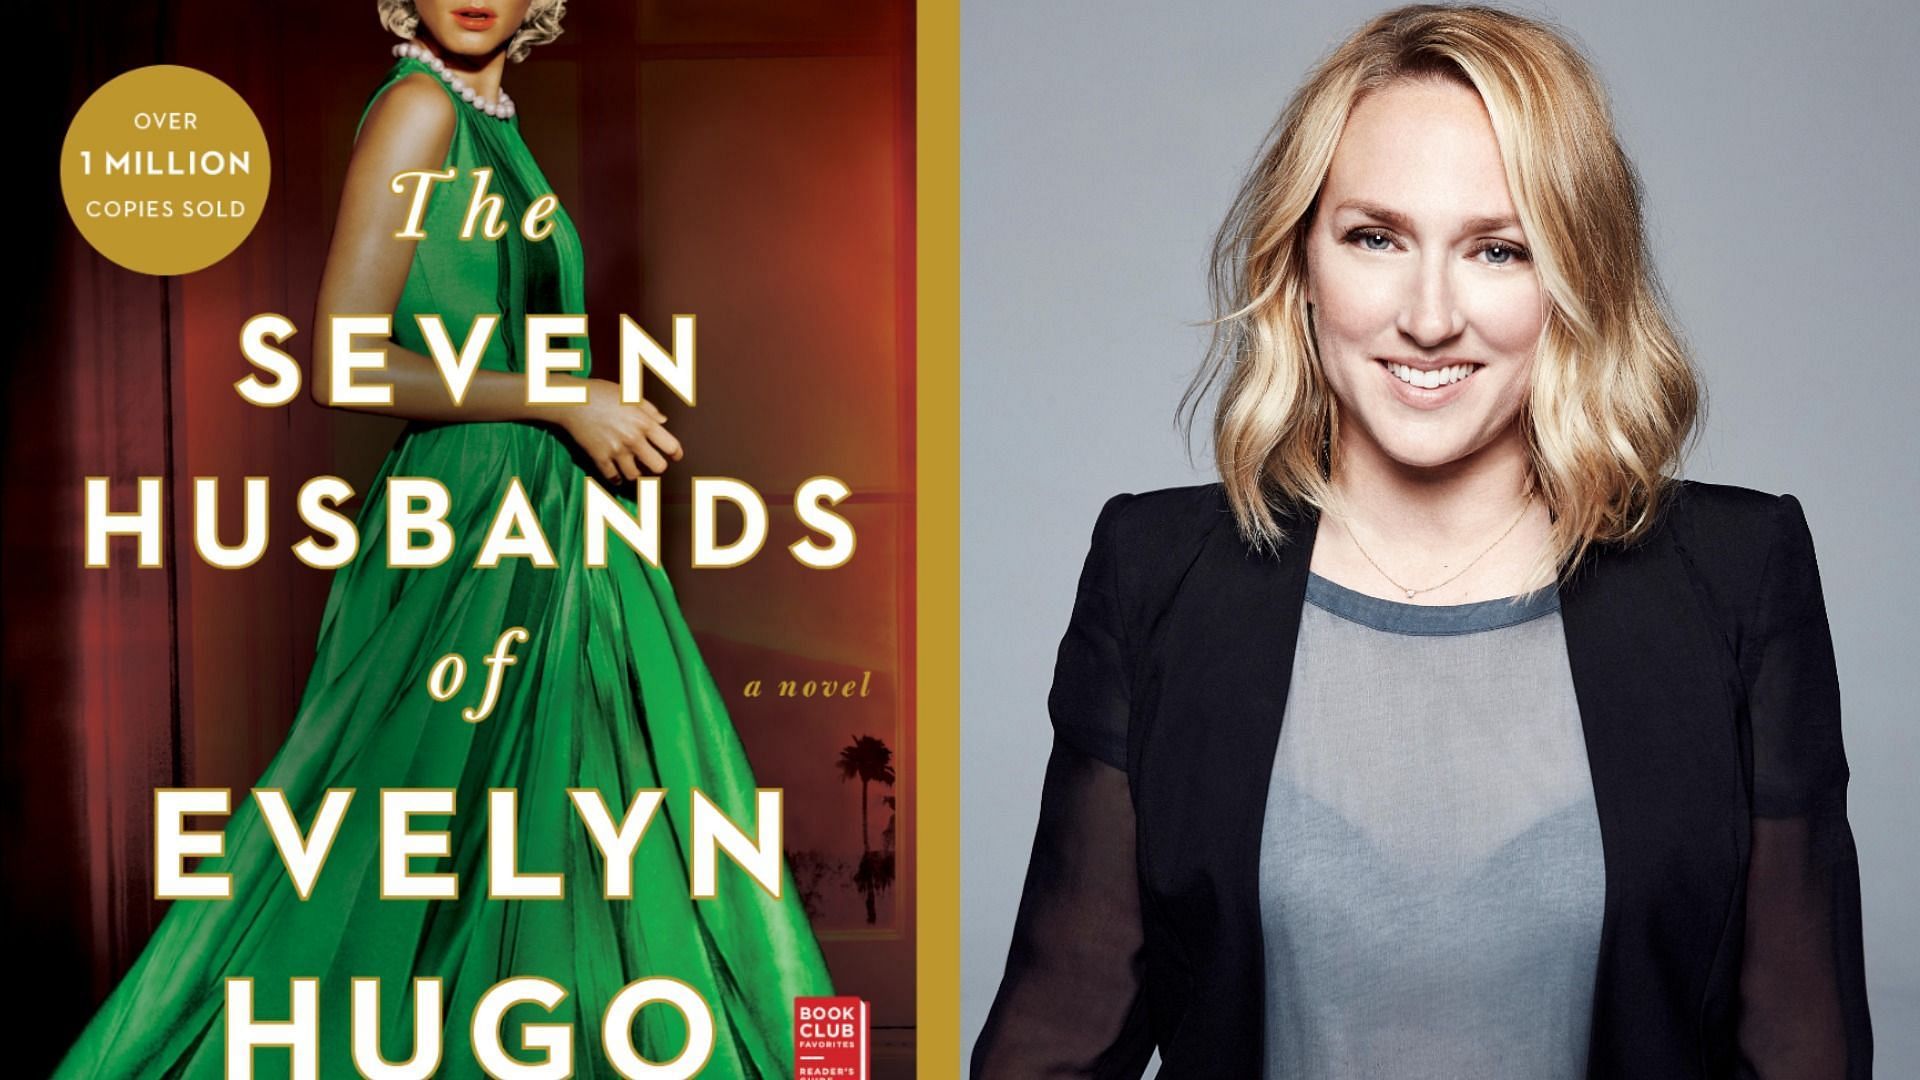 Taylor Jenkins Reid&rsquo;s &#039;The Seven Husbands of Evelyn Hugo&#039; is set to be adapted into a Netflix film (Image via Twitter/NetflixFilm)